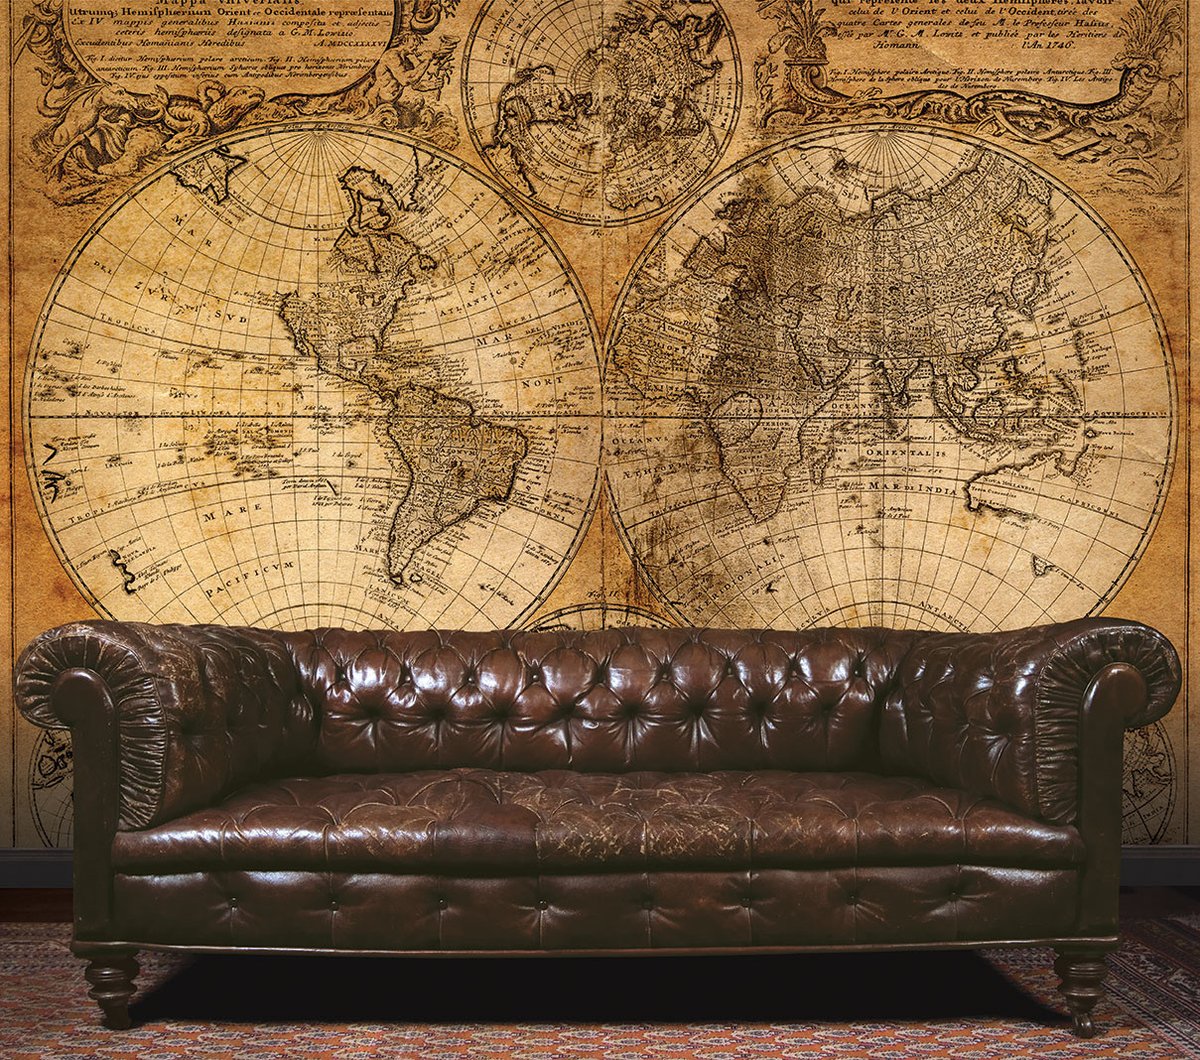 Maps do not have to be political and look like the belong to a class room. Go for an Antique Map from Global Fusion Mural G45255
#wallpaperpeeps #thewallpaperpeople #decor #wallpaperlove #featurewall #wallcovering #Wallpaper #GalerieHome #GlobalFusion bit.ly/2QqSuQT
: